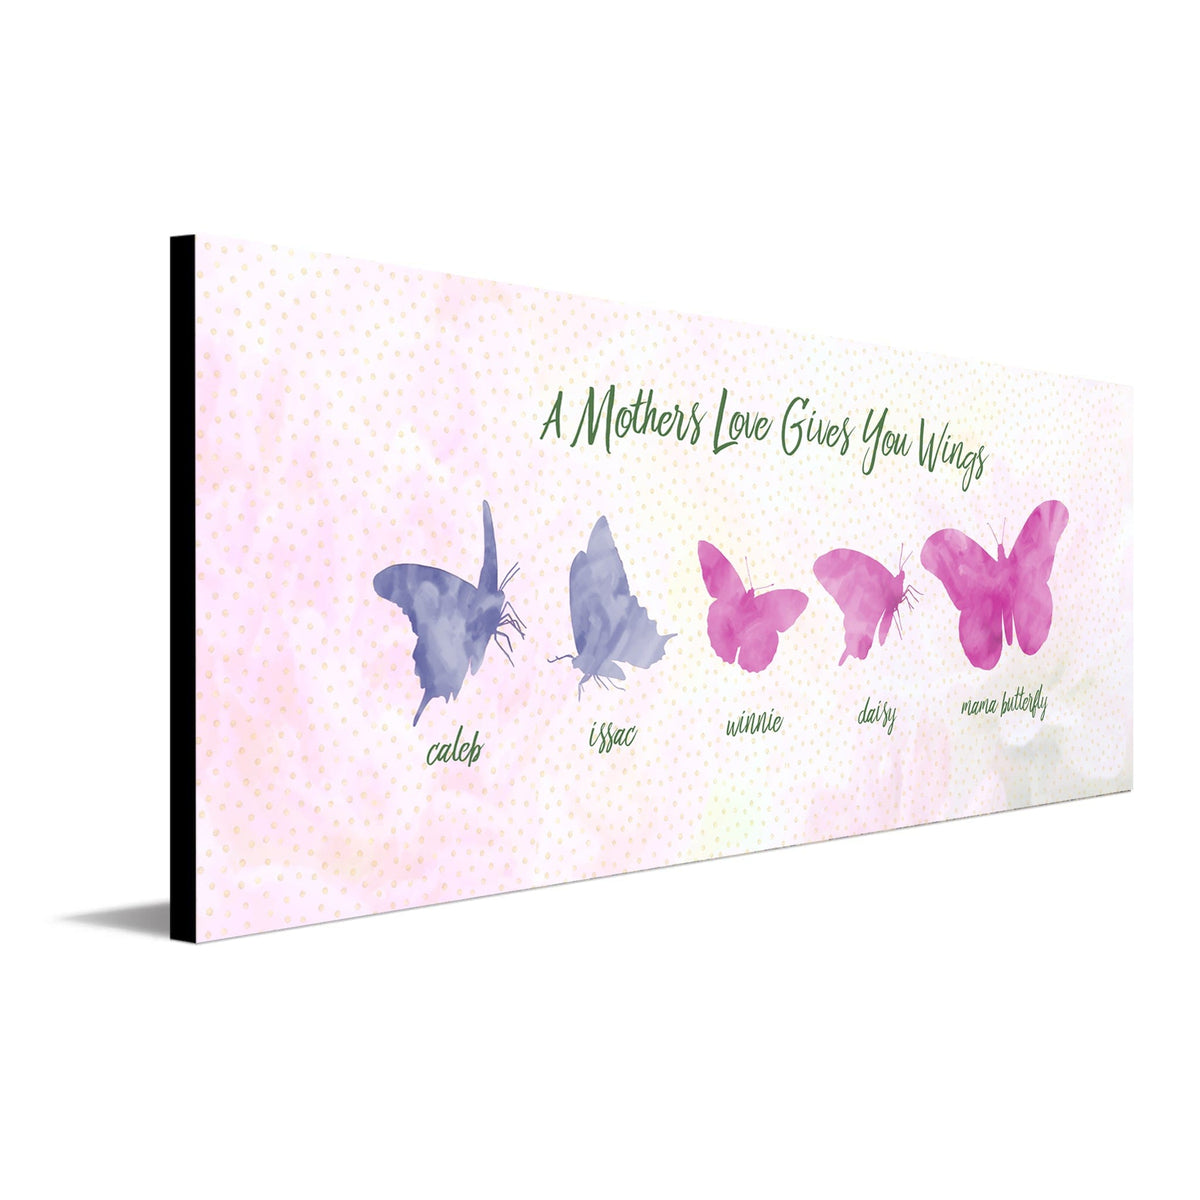 Personalized mother&#39;s day gift - butterflies from Personal Prints